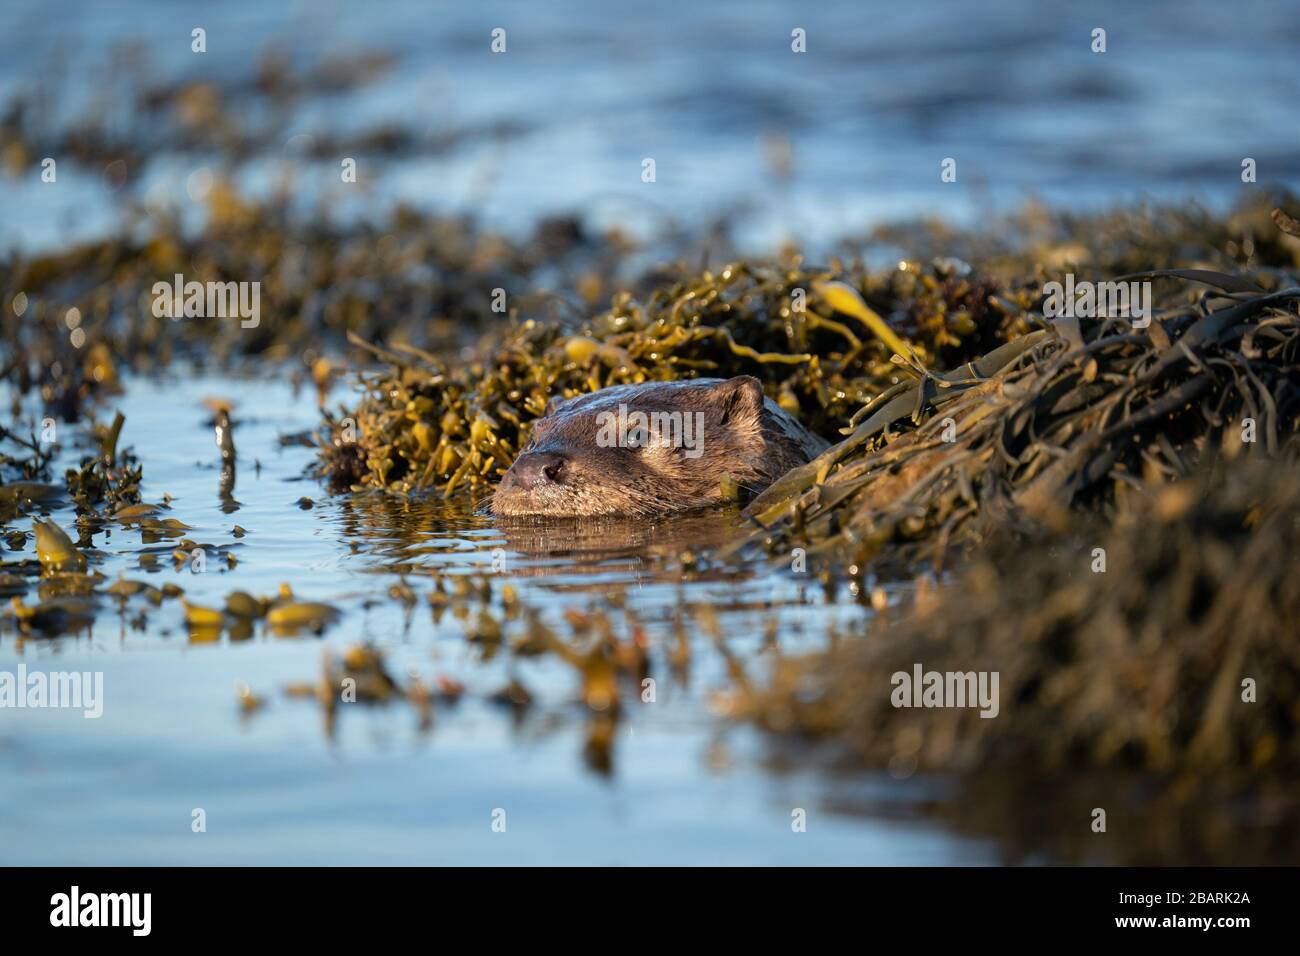 Close up of a European Otter cub (Lutra lutra) floating in a kelp bed Stock Photo